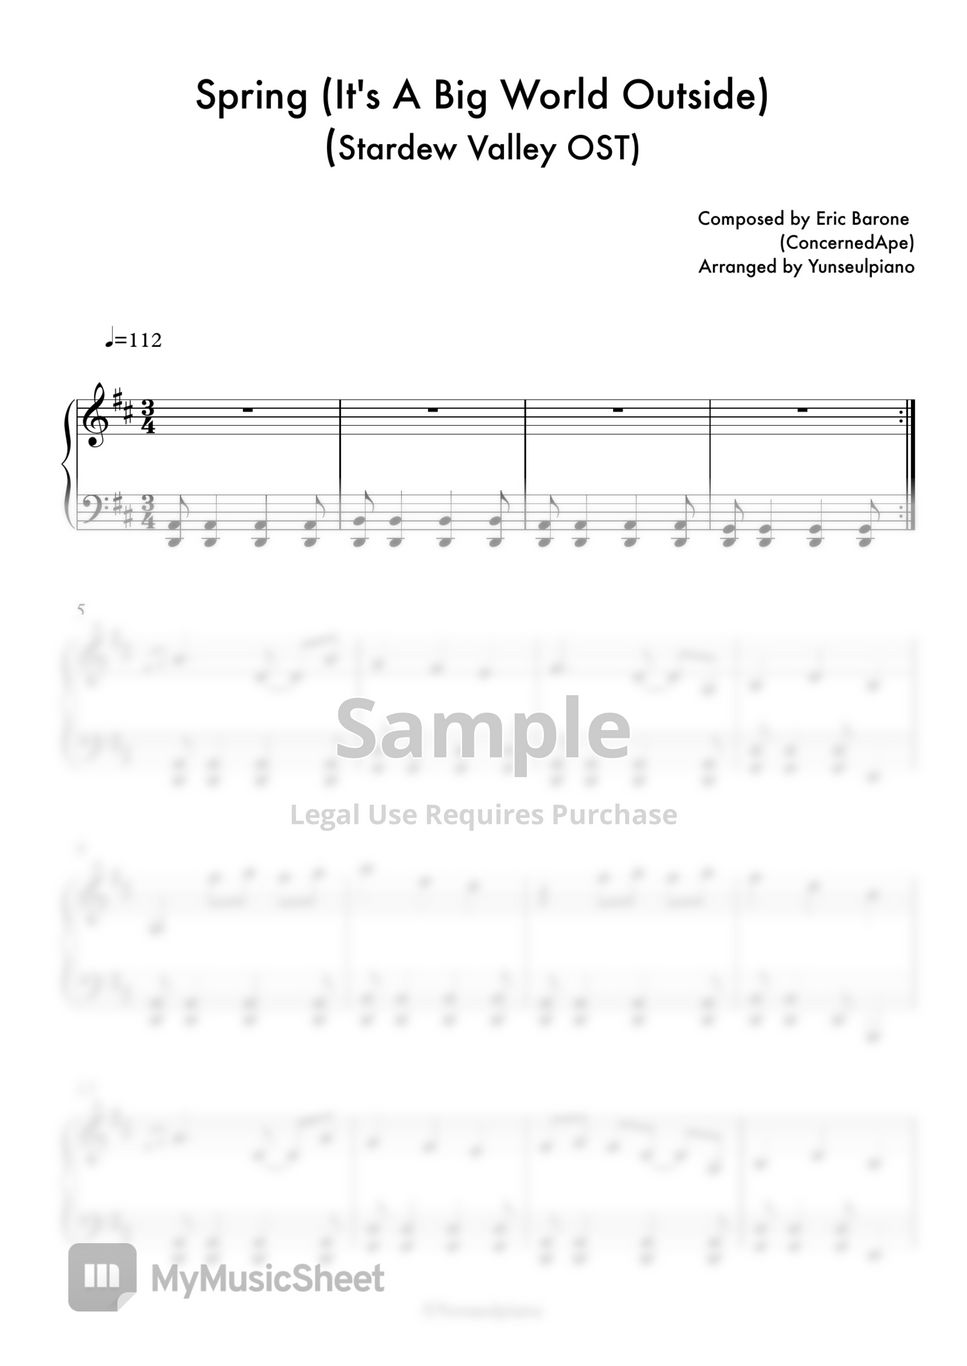 Stardew Valley OST - Spring (It's A Big World Outside).pdf by Yunseulpiano